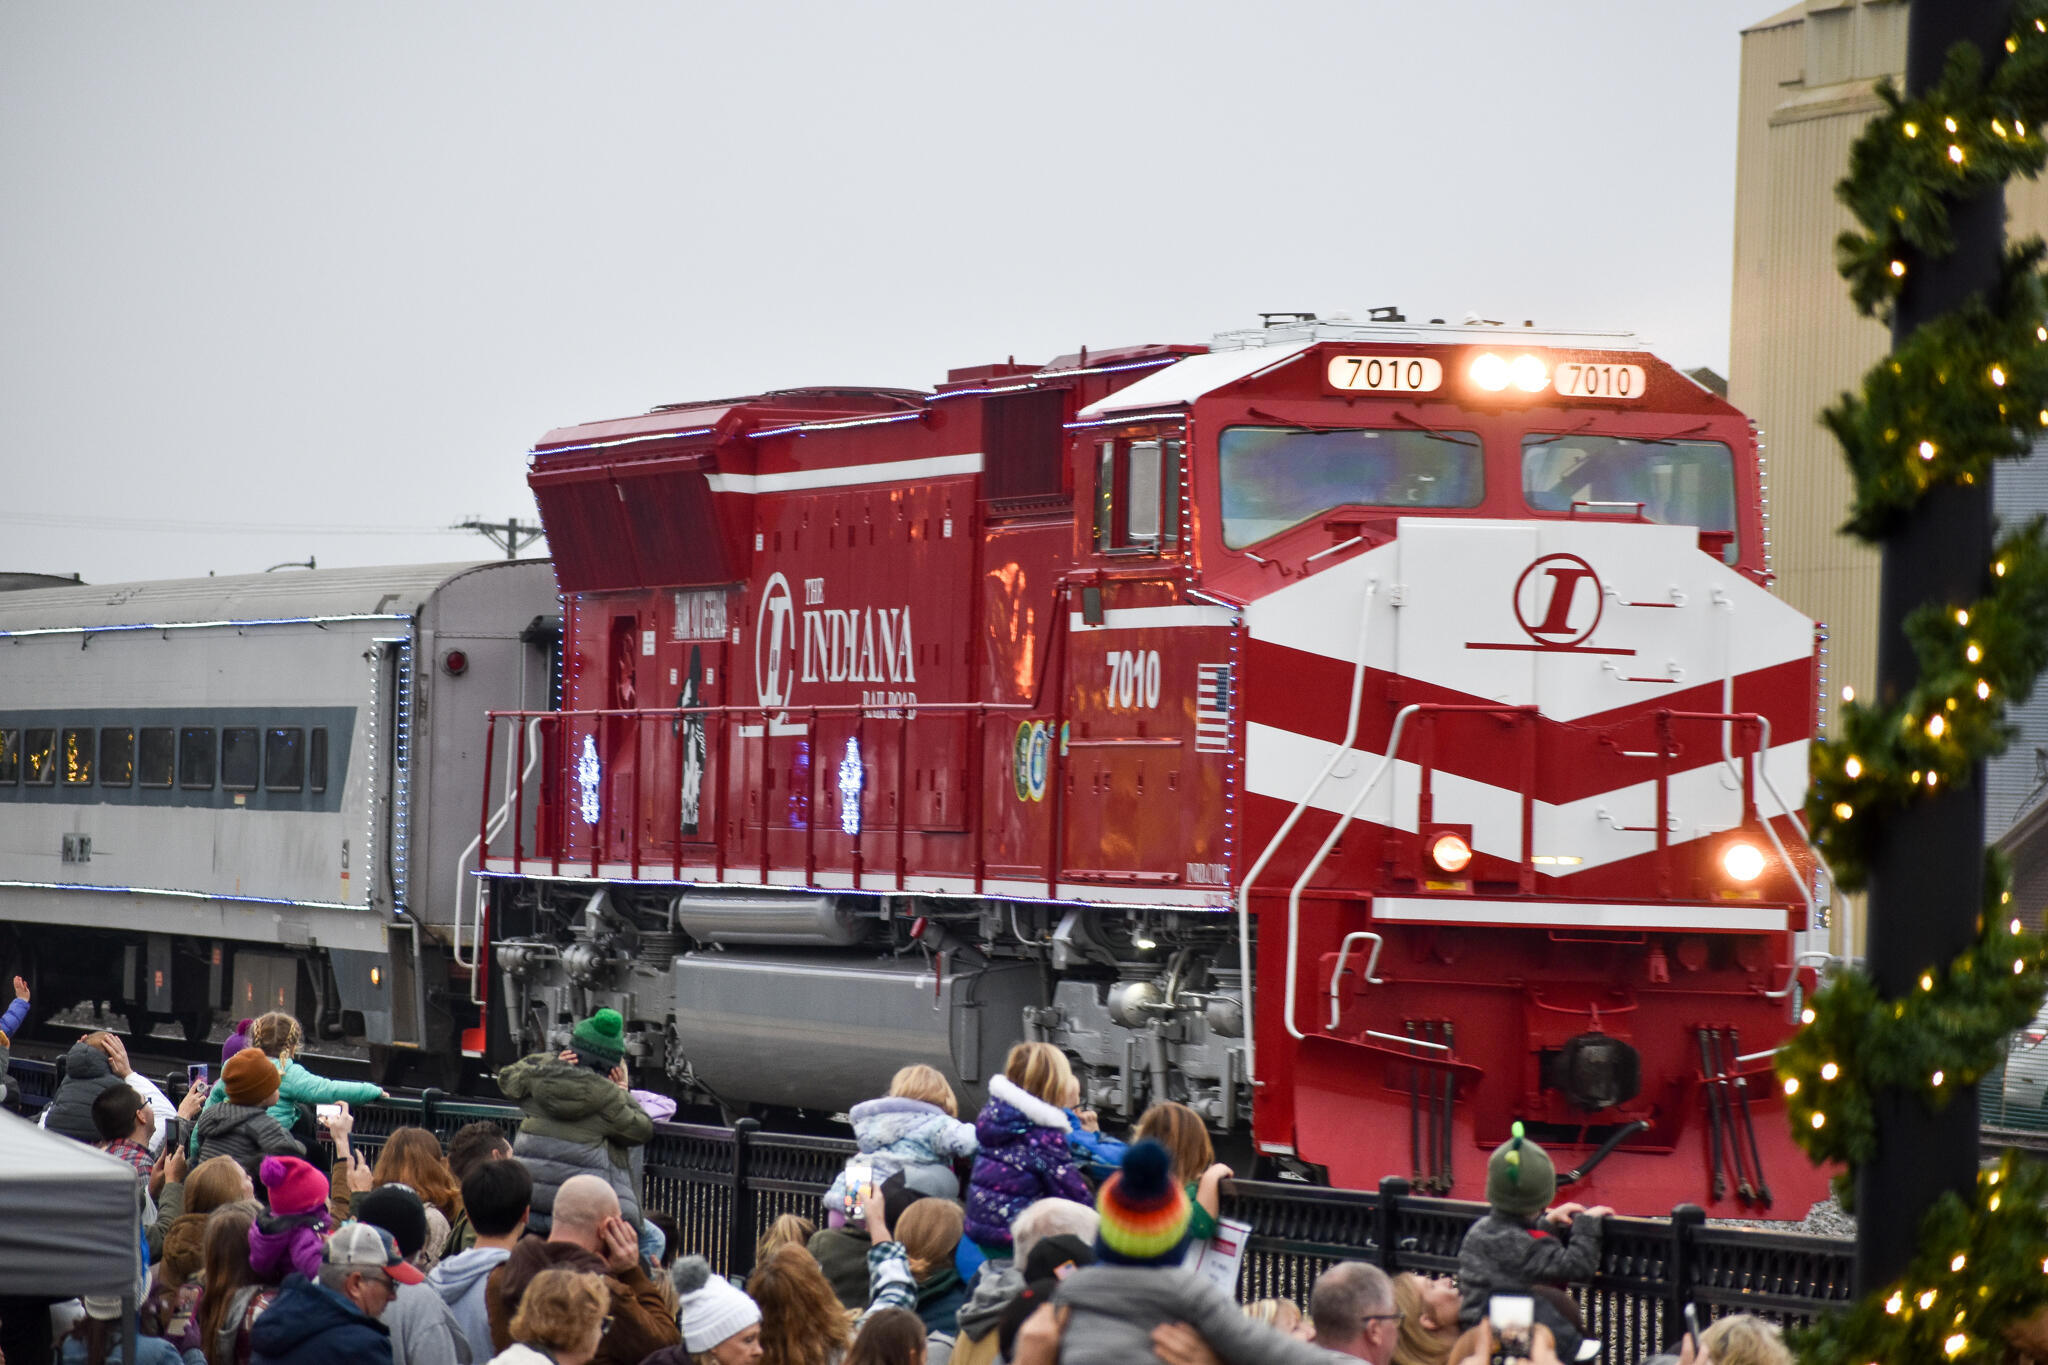 Thank you to everyone who joined us for the Santa Train & Holiday